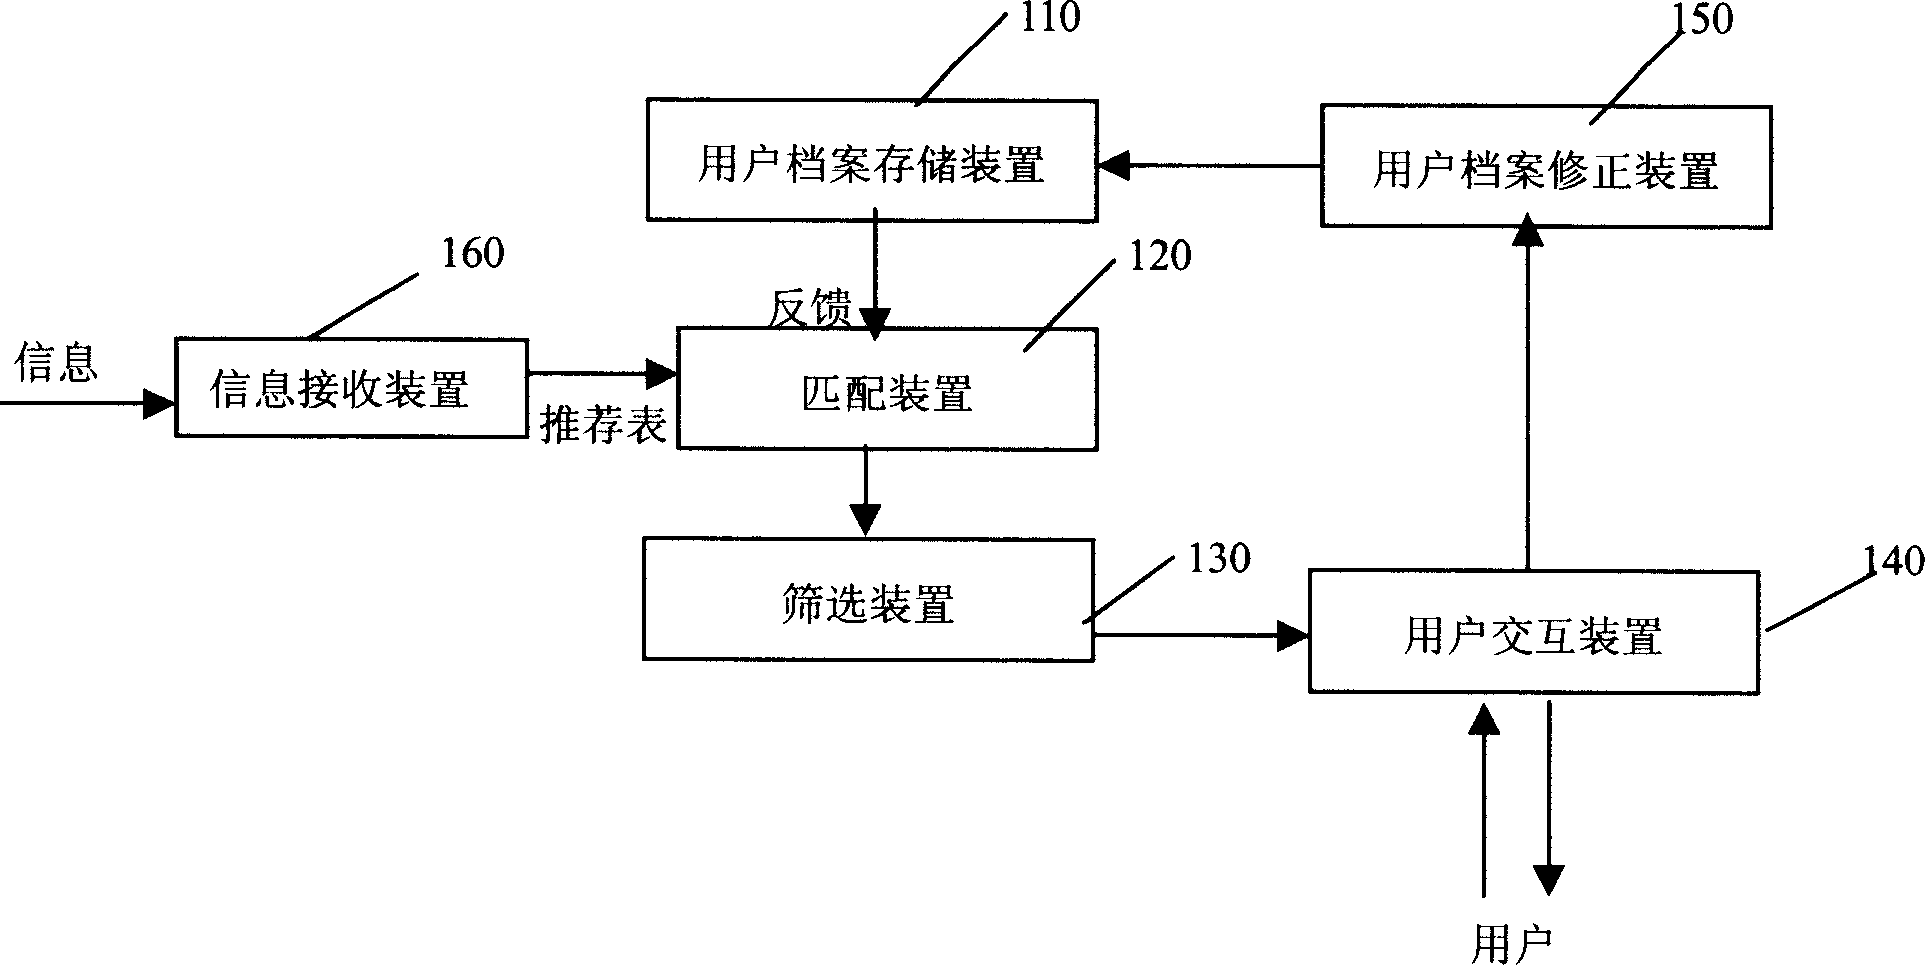 Information recommendation system and method